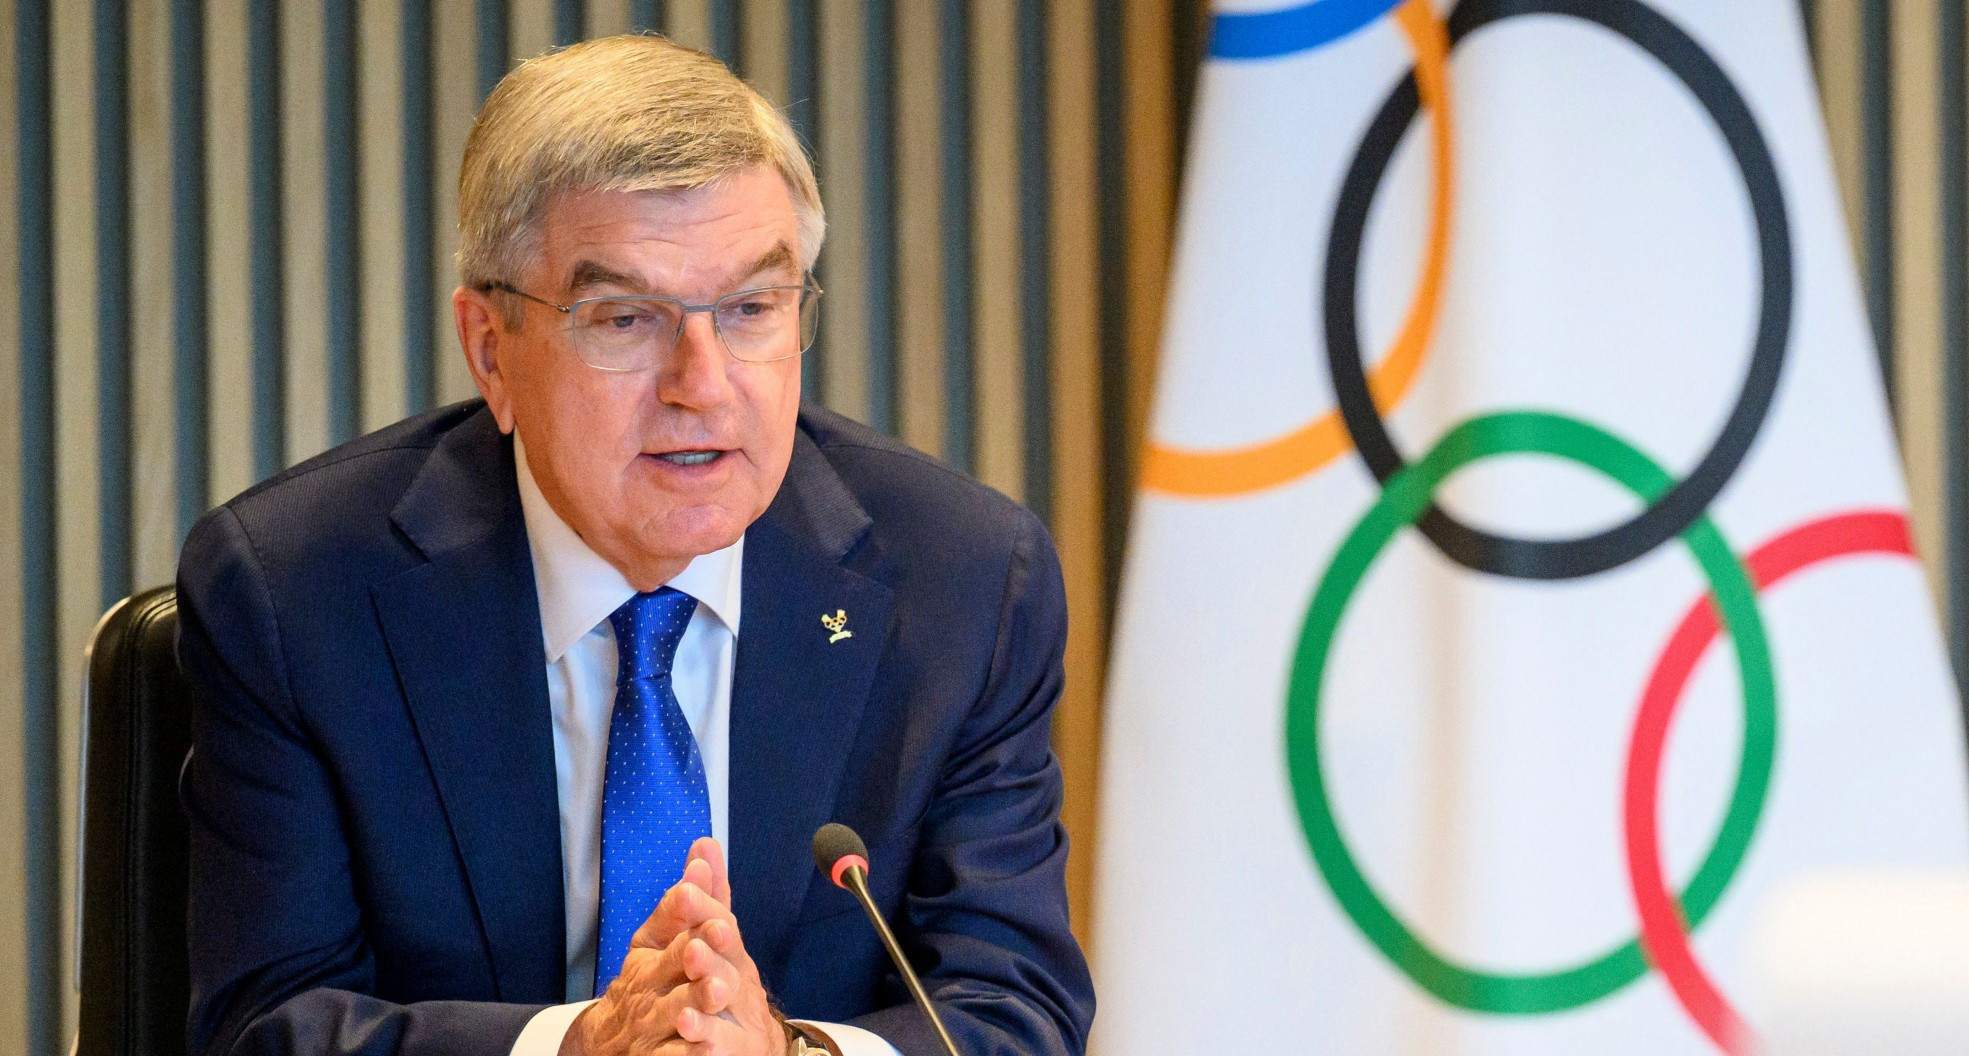 Bach insists IOC has "full confidence" in French security authorities for Paris 2024